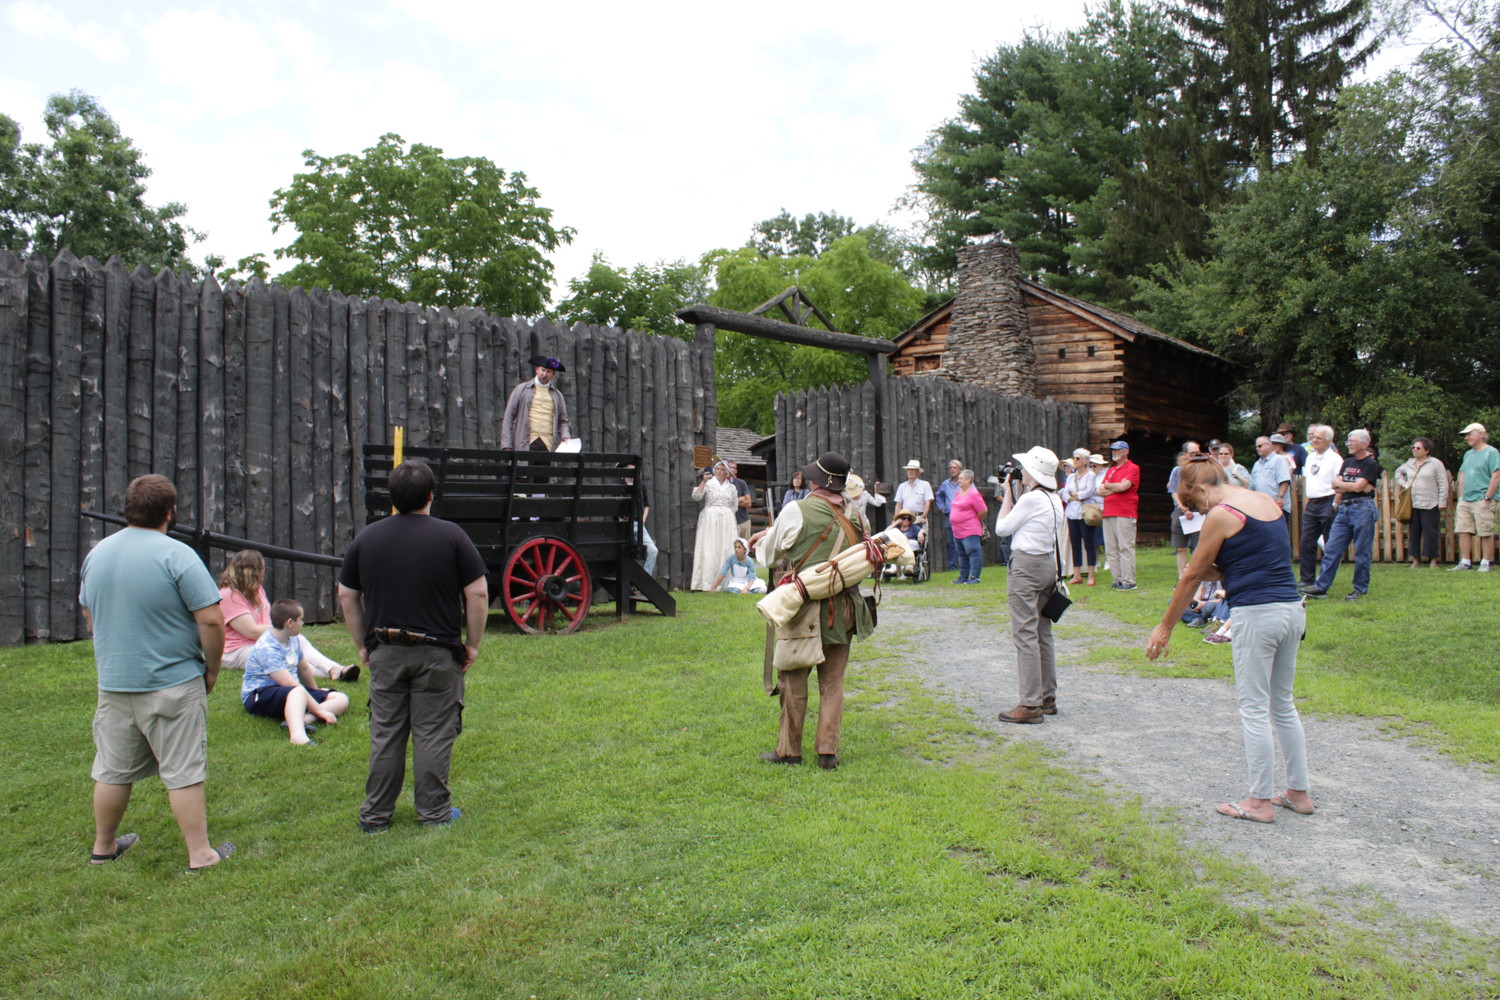 Visitors throng to Fort Delaware for the first event of the 2021 season.